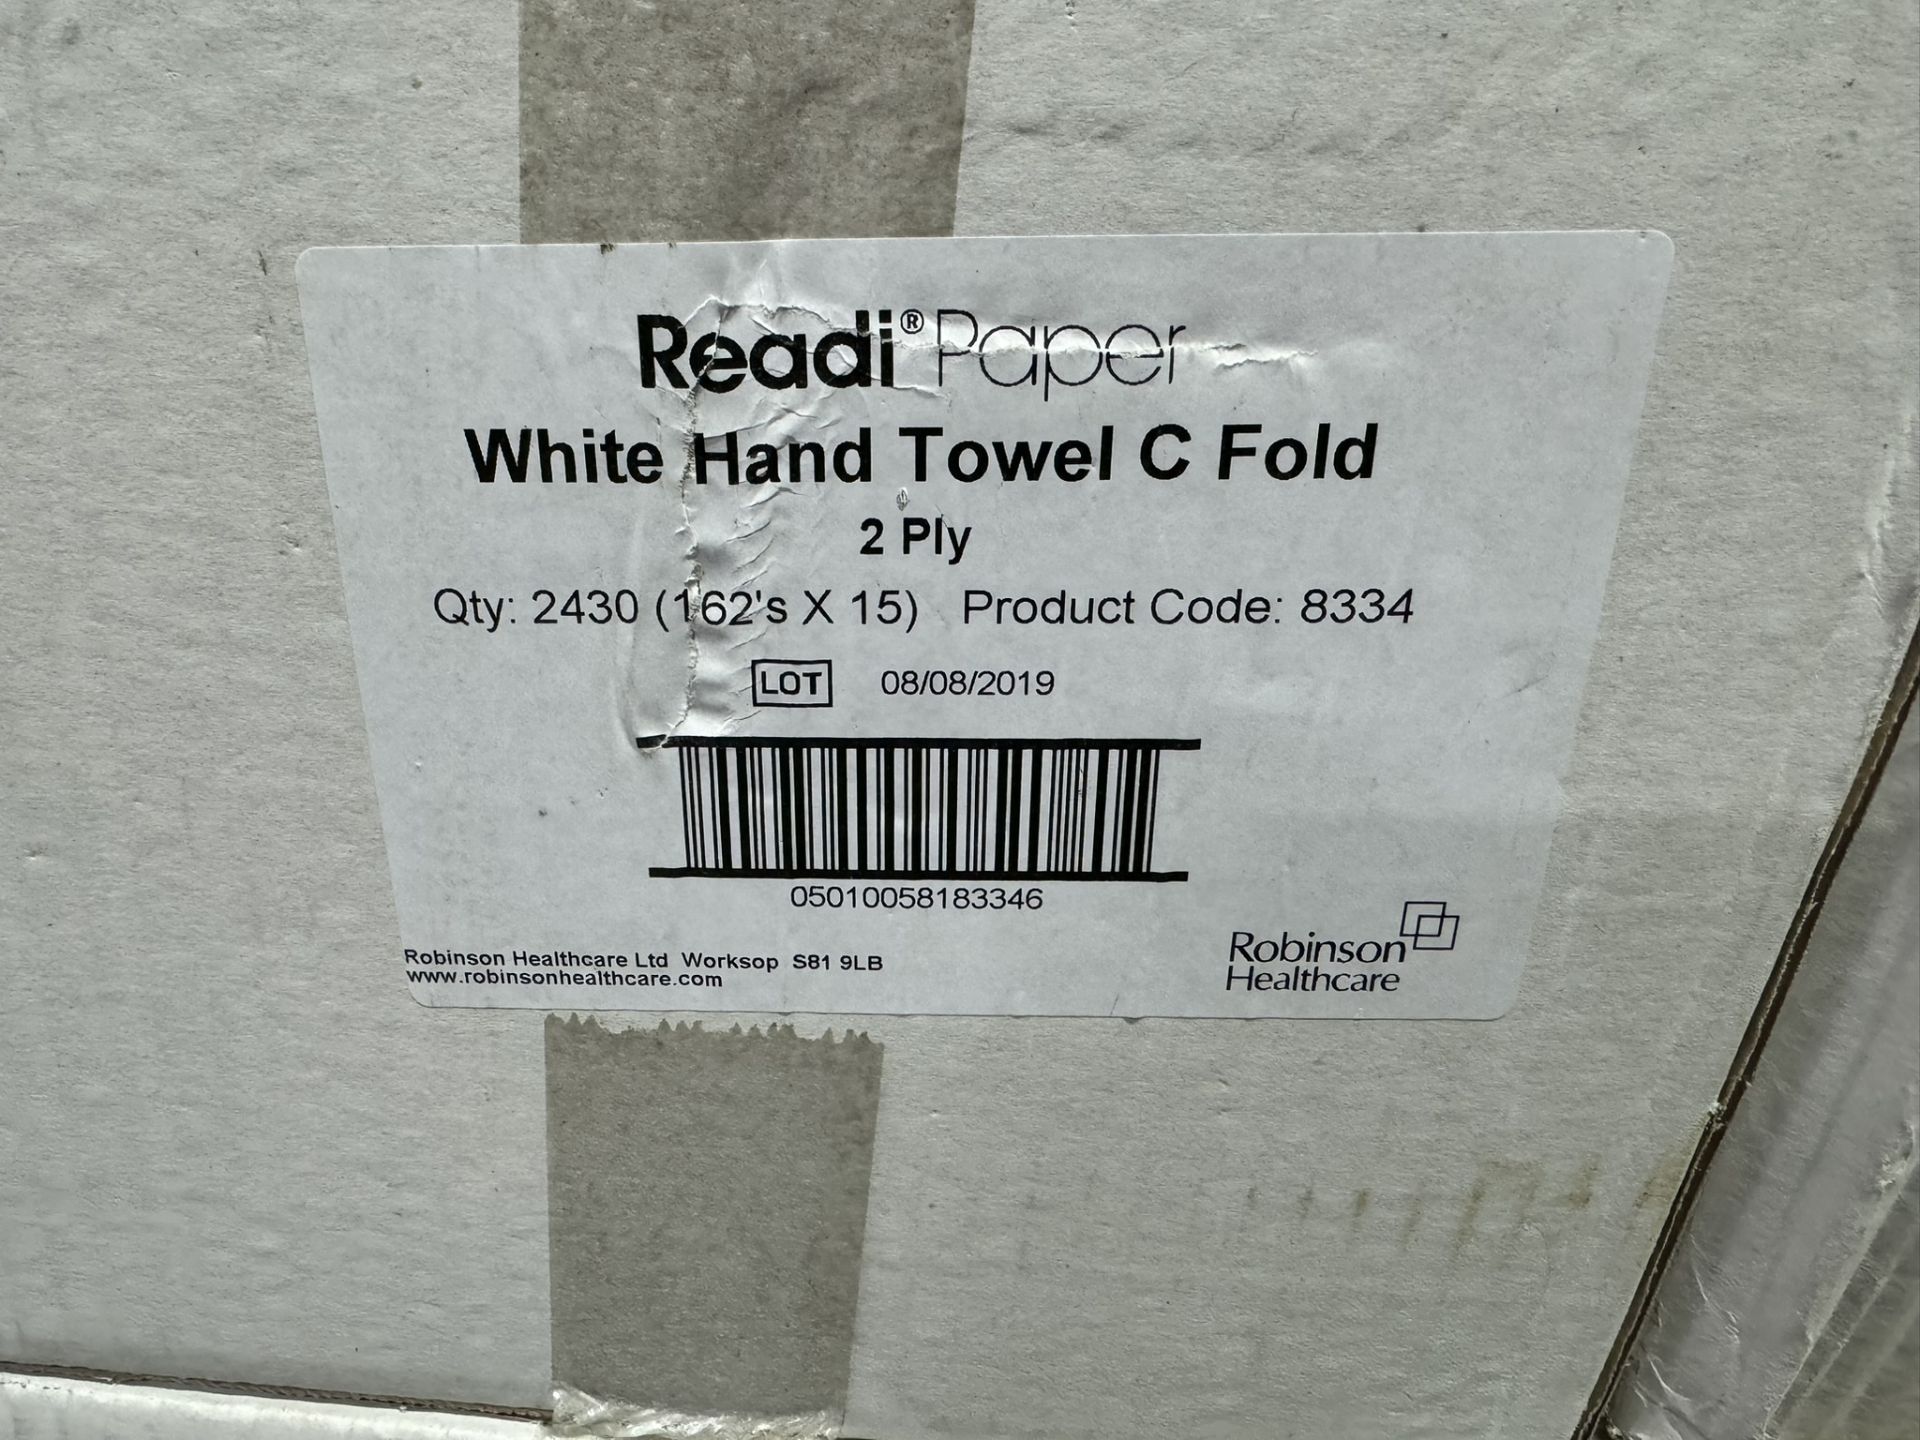 4 x Boxes Redi Paper 2 Ply White Hand Towel C Fold - Image 3 of 6